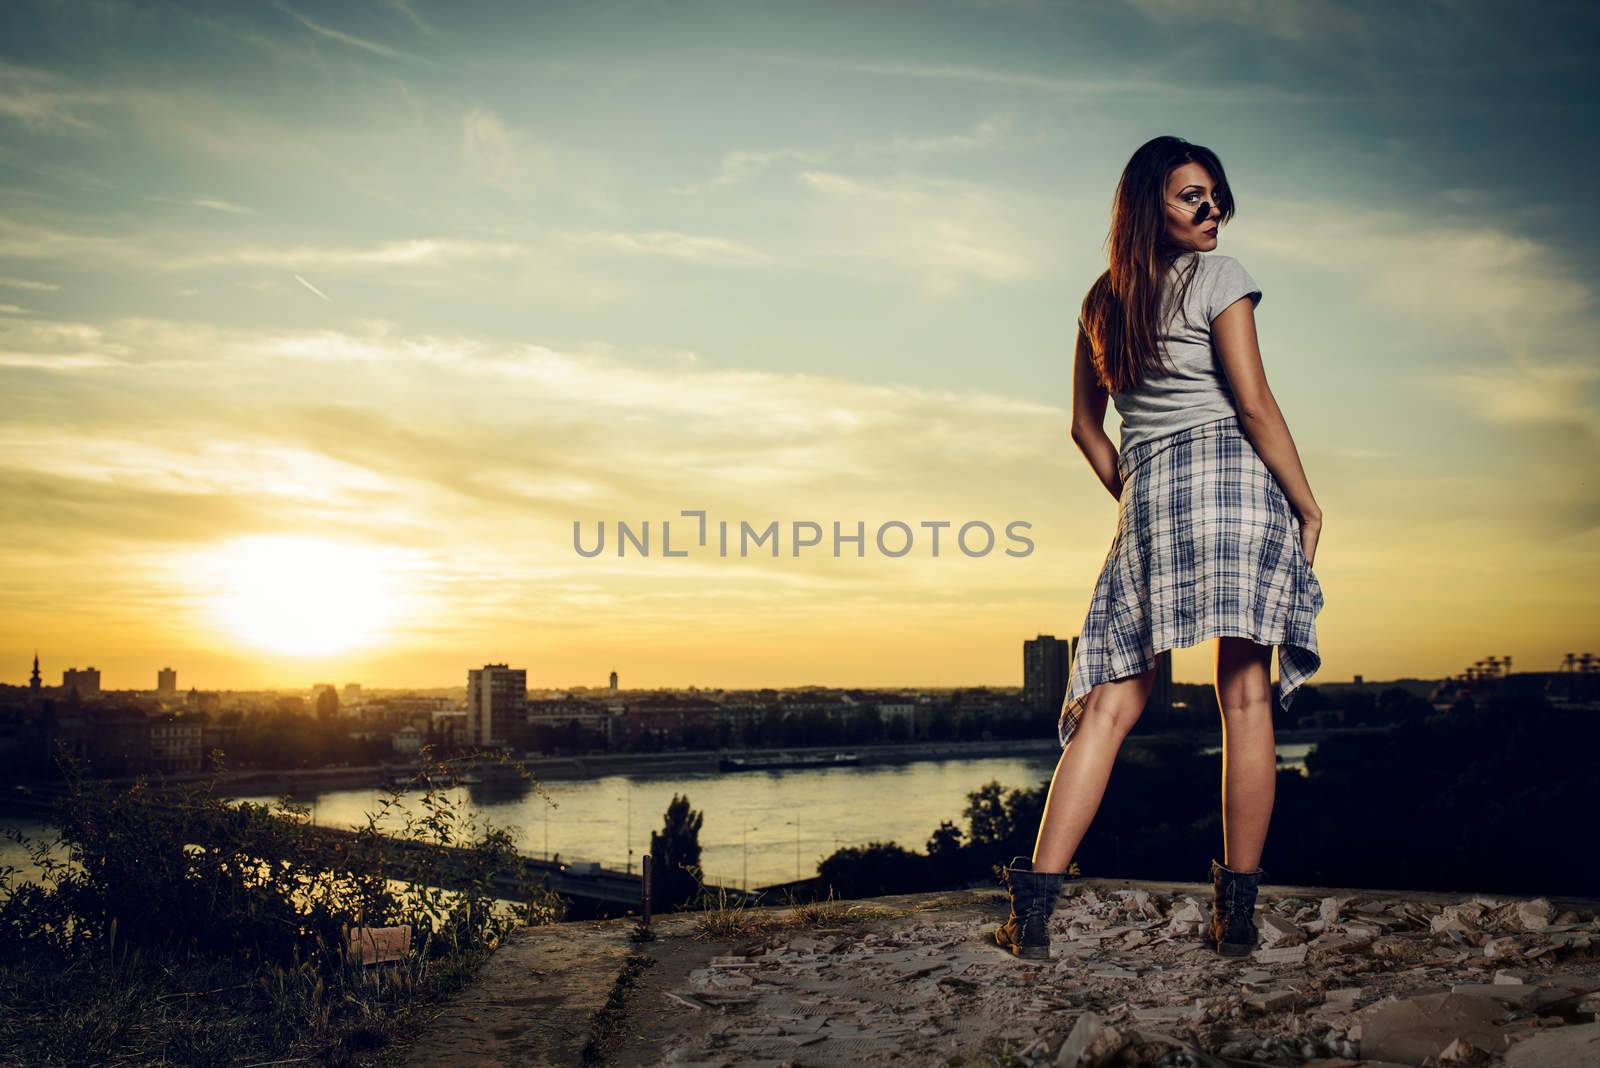 Fashion girl posing in sunglasses at sunset above the city